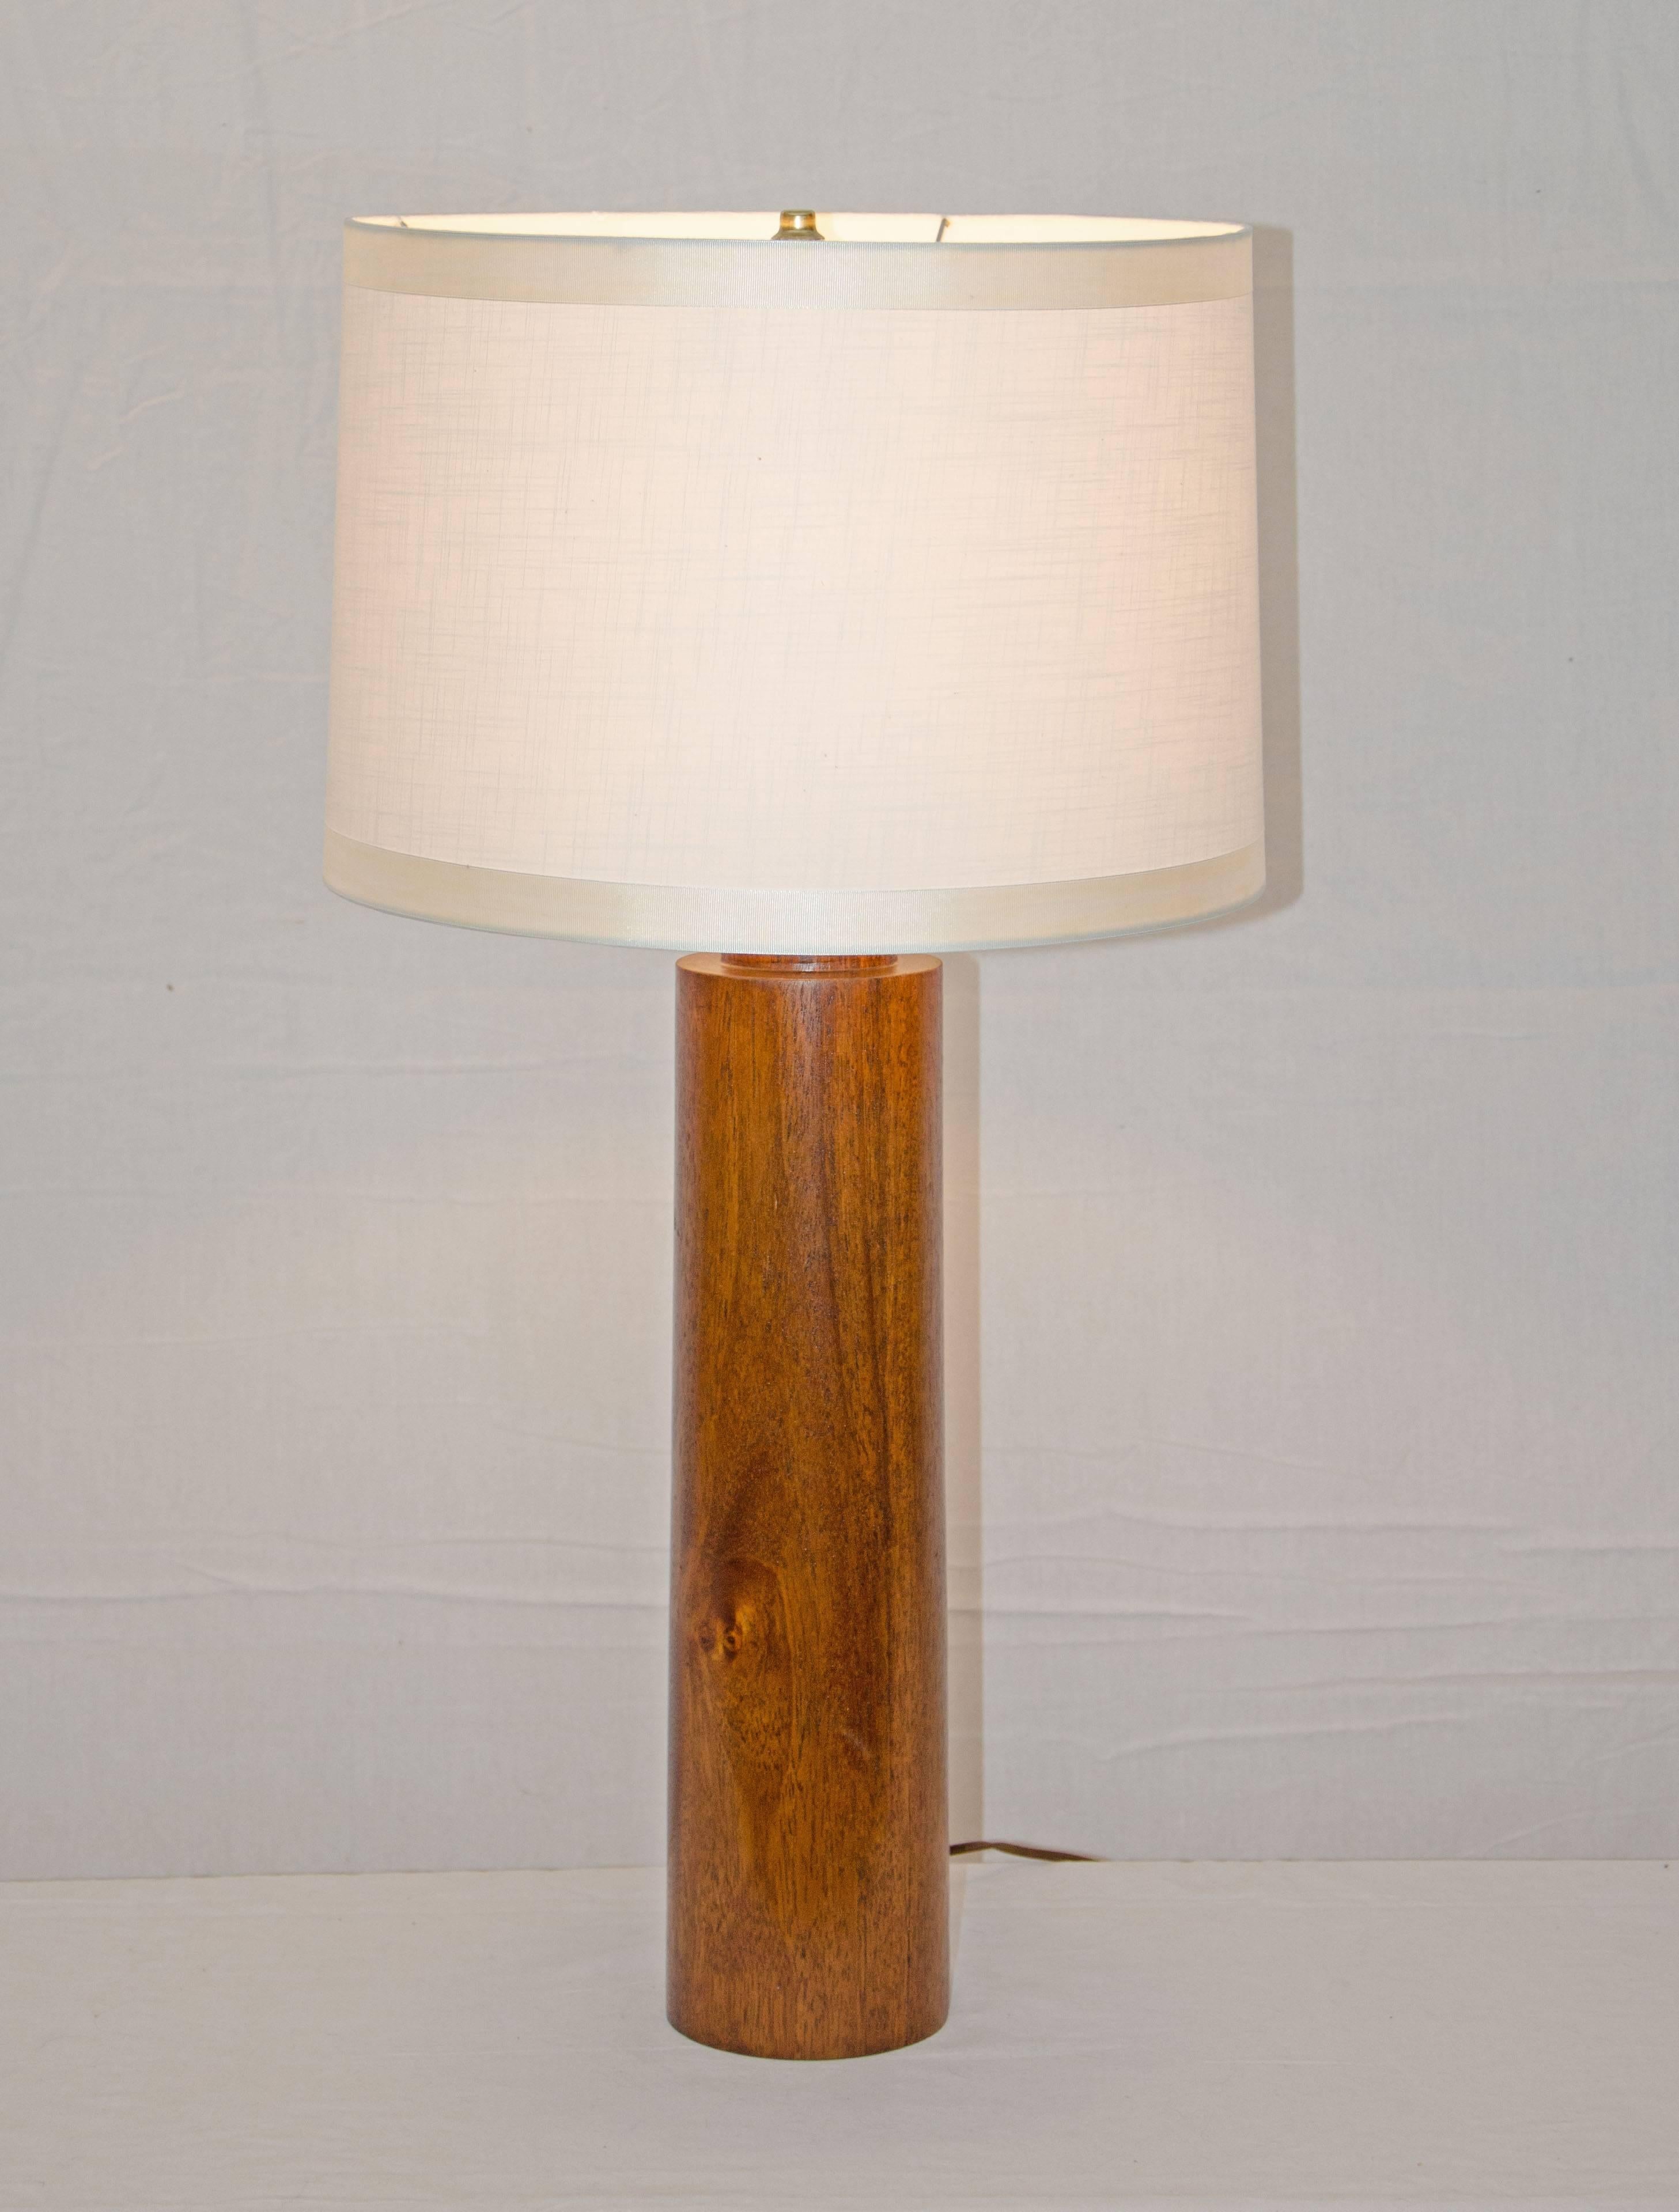 Impressive simple mahogany cylindrical base table lamp can be used as an accent light in many different places. Measures: The base is 20 1/4